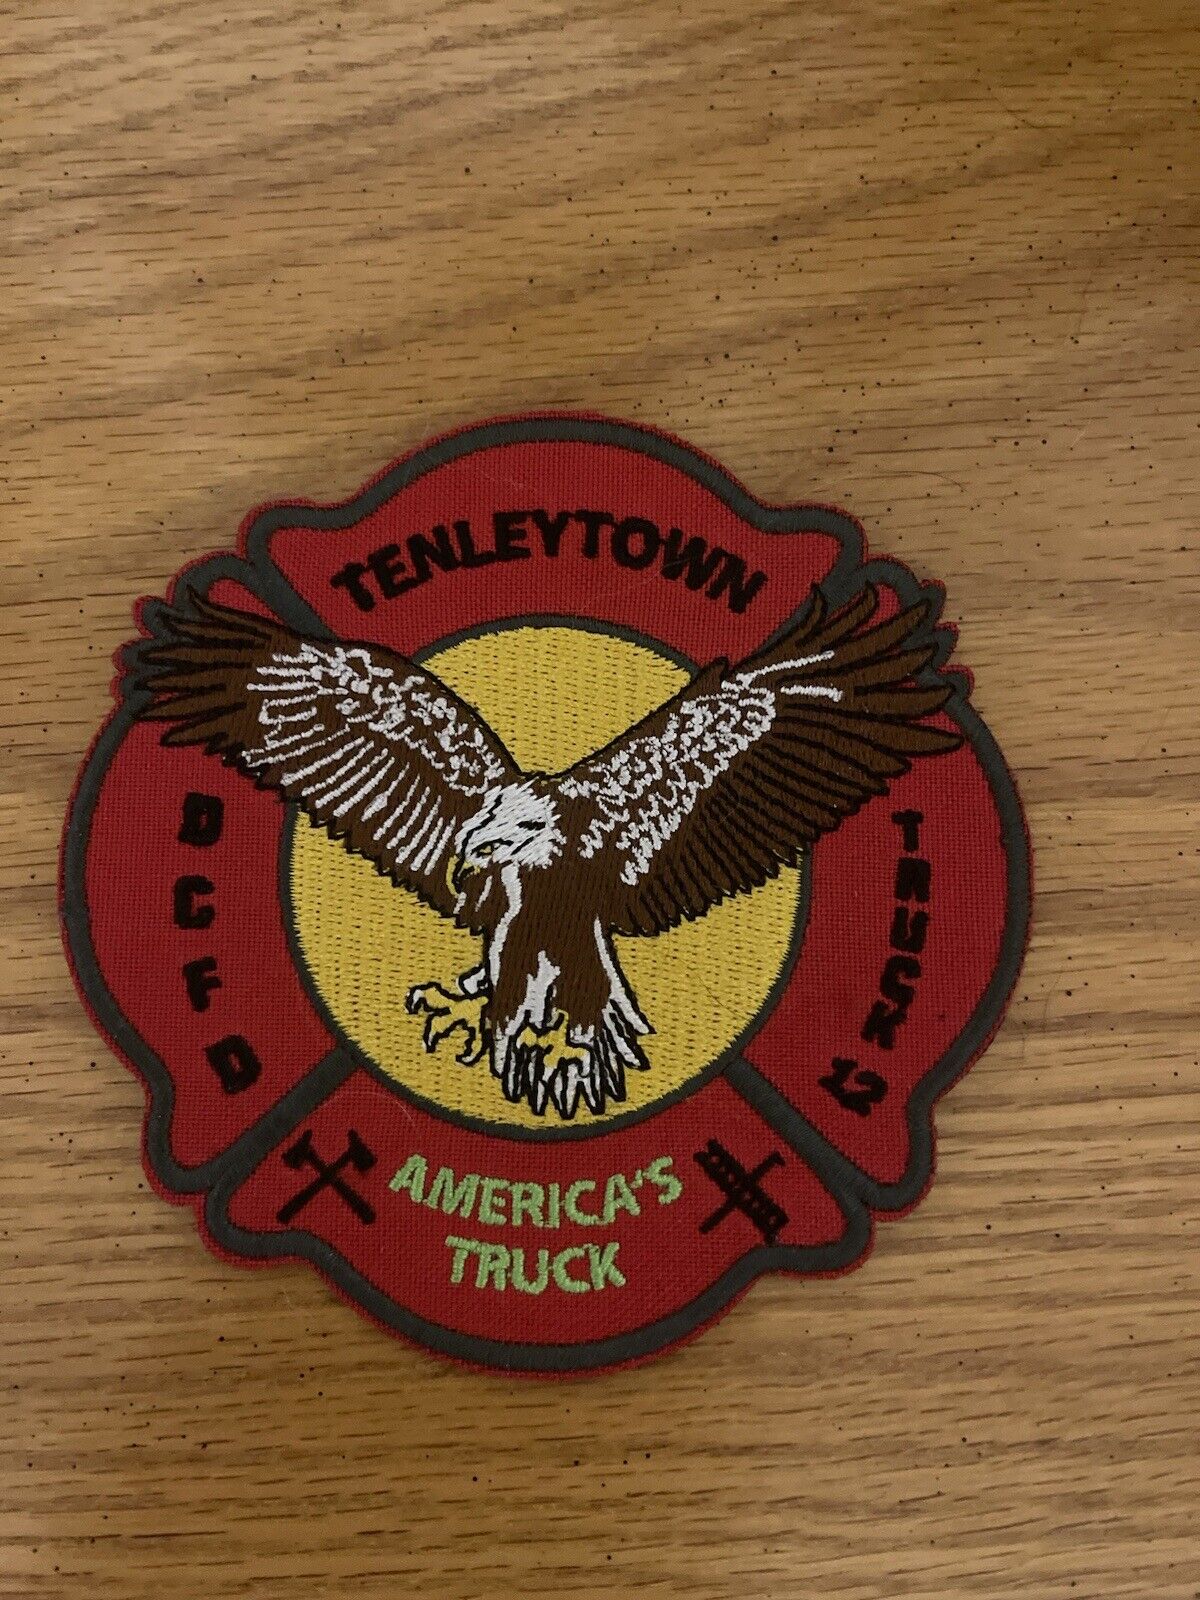 DCFD Truck 12 Patch